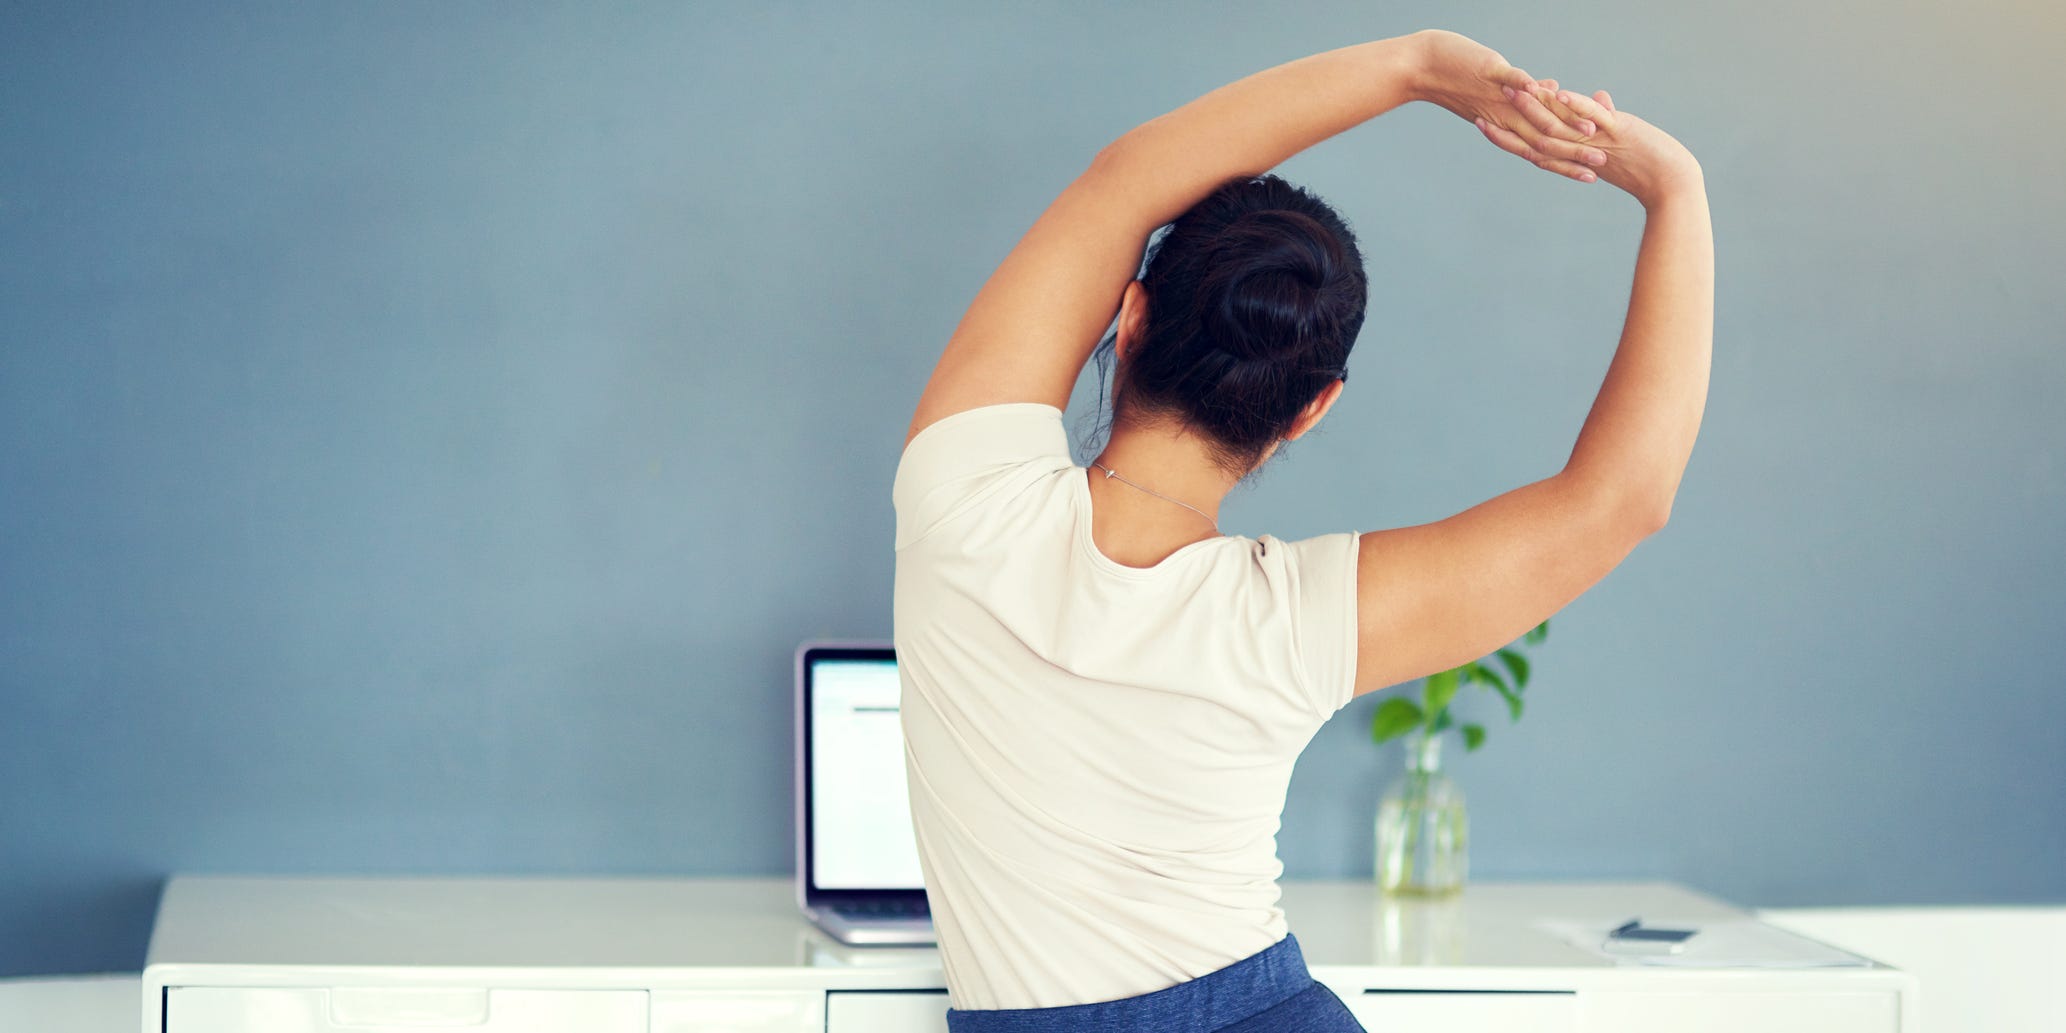 How To Correct Your Posture - 5 Home Exercises To Fix Your Posture